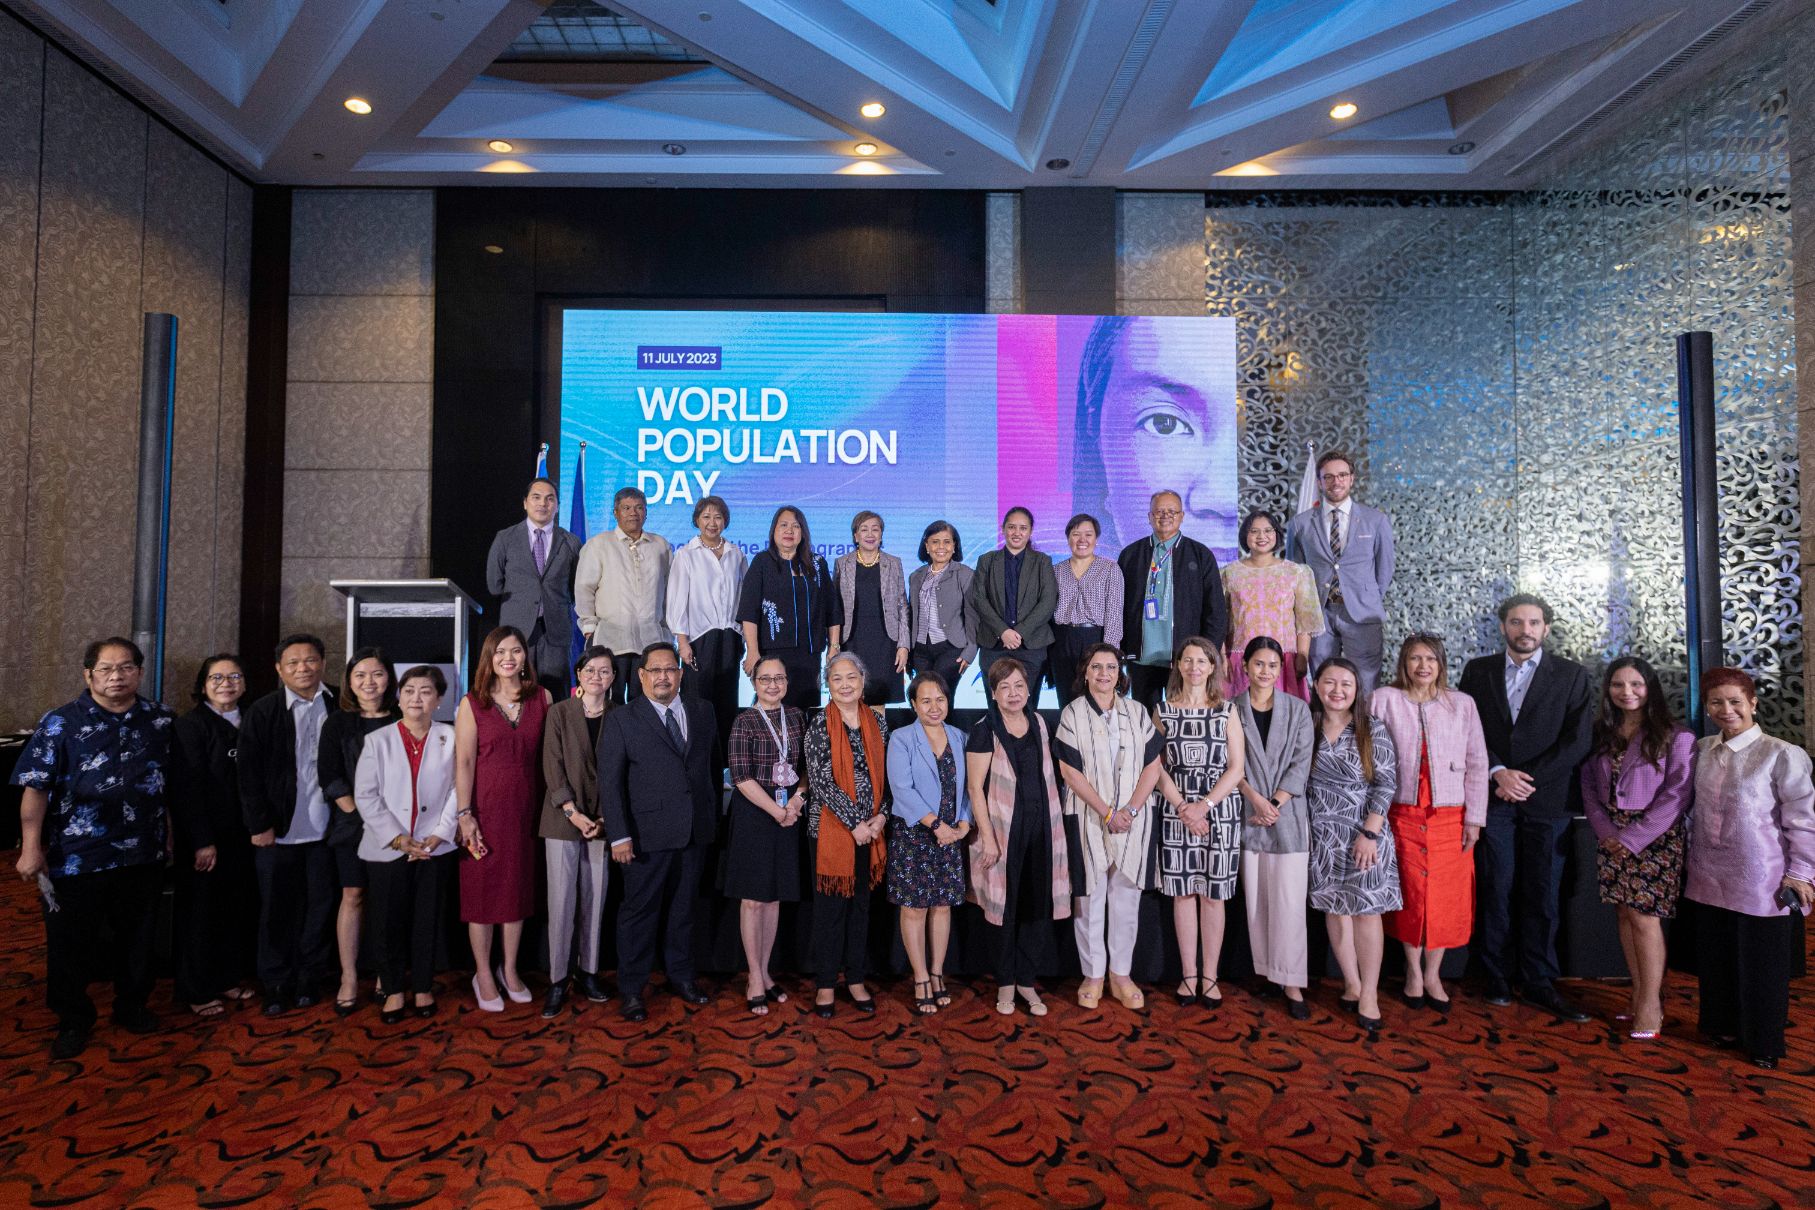  United Nations Population Fund (UNFPA) Philippines and its partners at the World Population Day event.